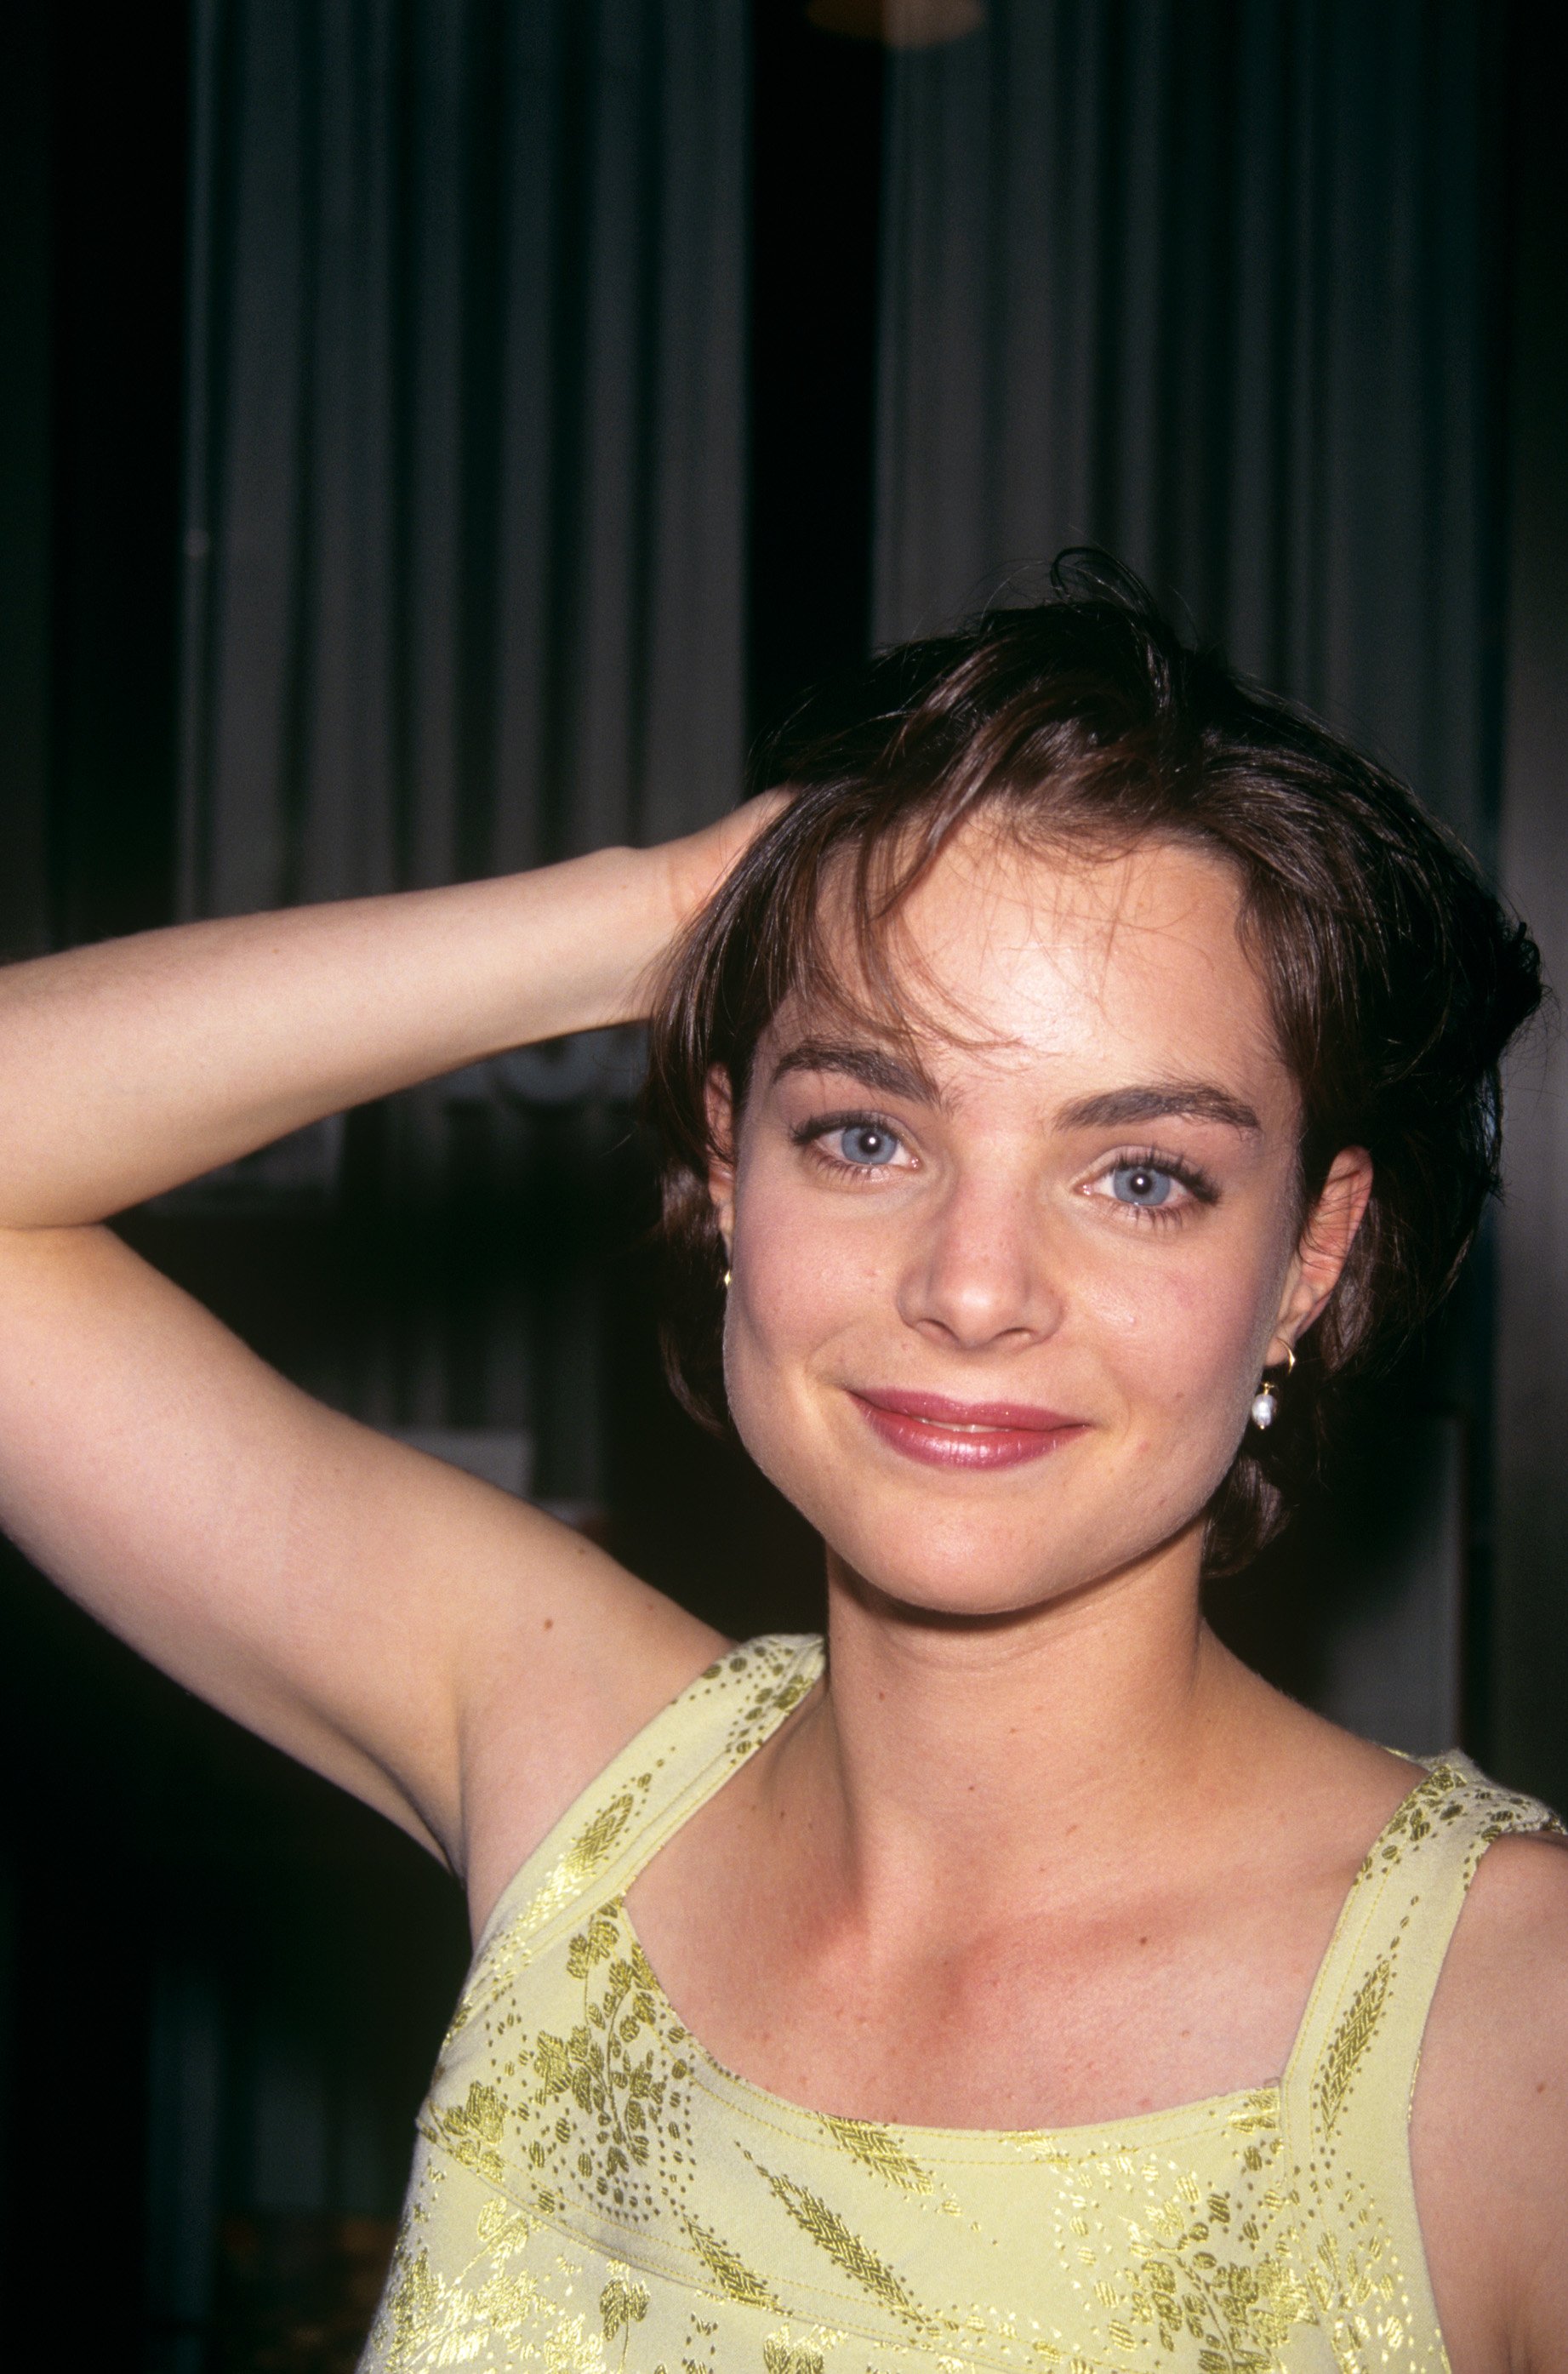 Kimberly Williams at the ABC party in New York City on May 20, 1996. | Source: Getty Images